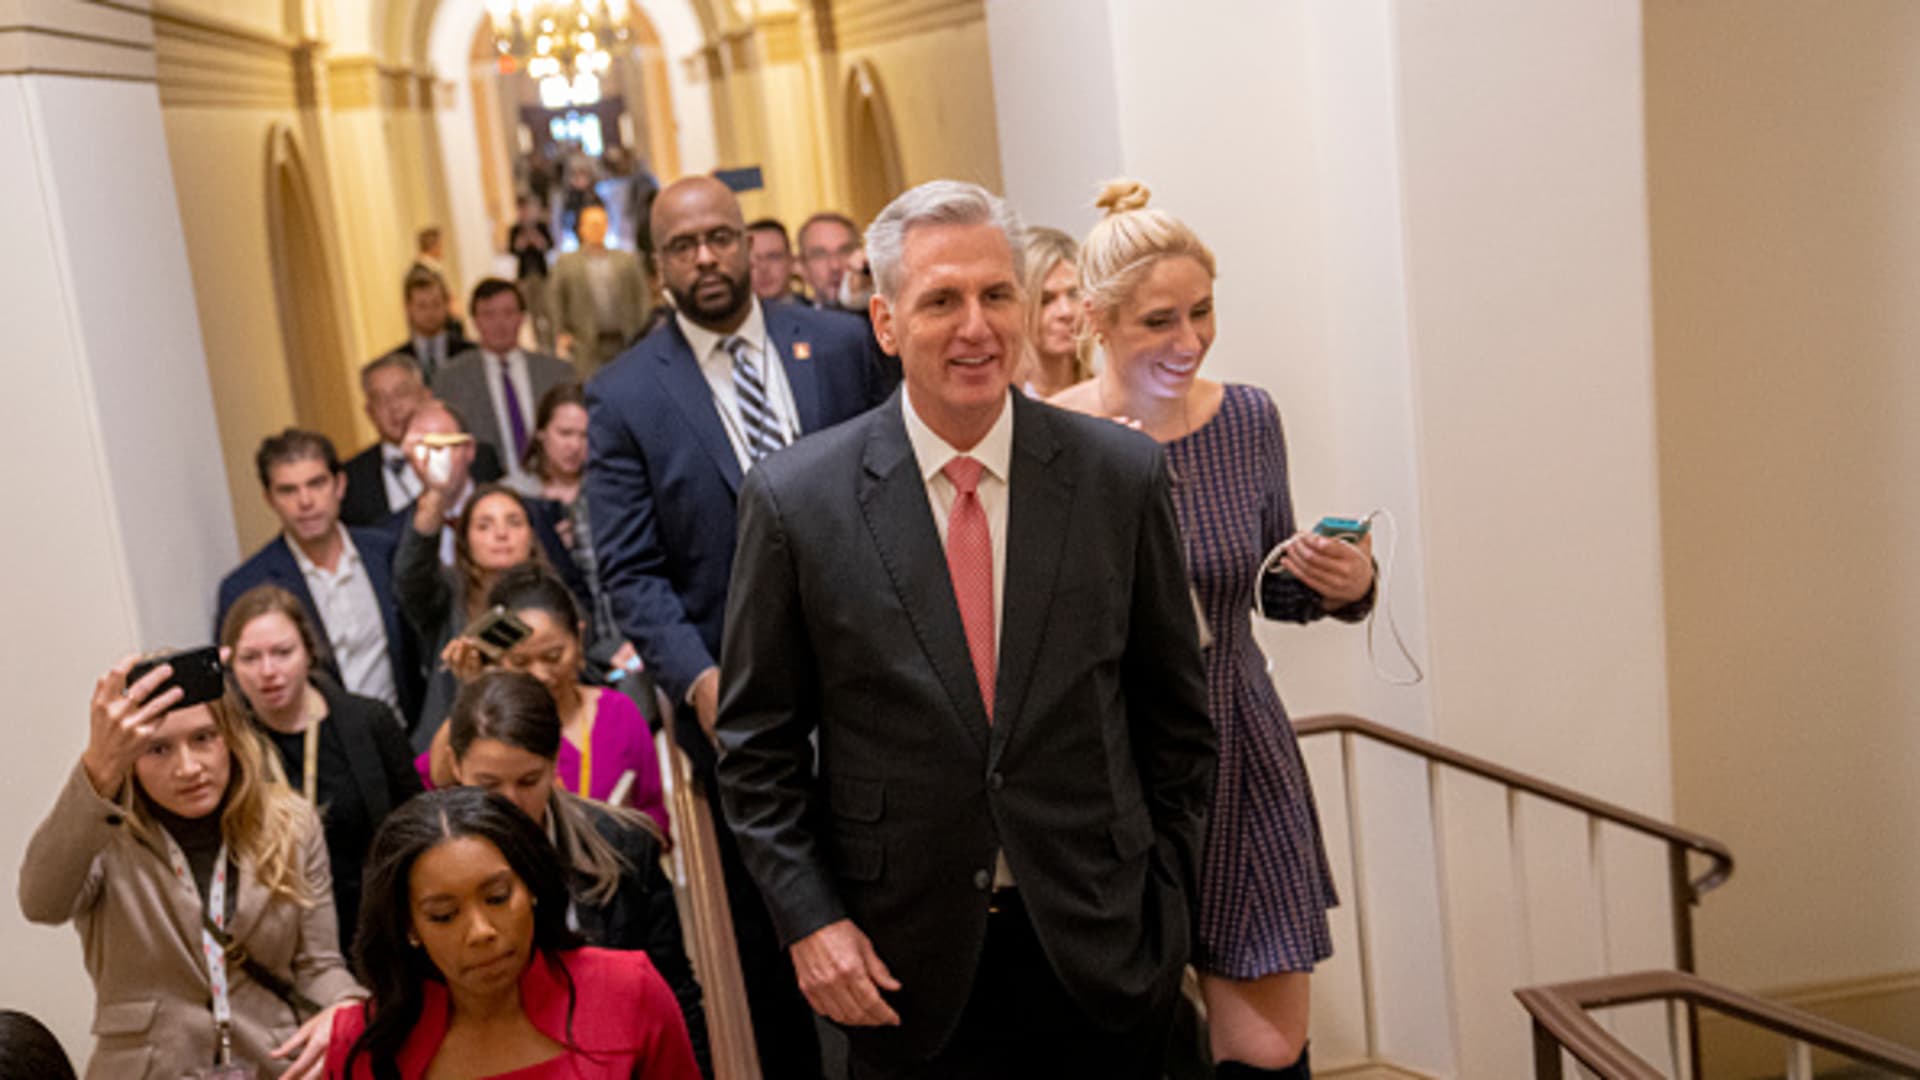 U.S. House Republican Leader Rep. Kevin McCarthy (R-CA) walks to his office during the third day of elections for Speaker of the House at the U.S. Capitol Building on January 05, 2023 in Washington, DC.